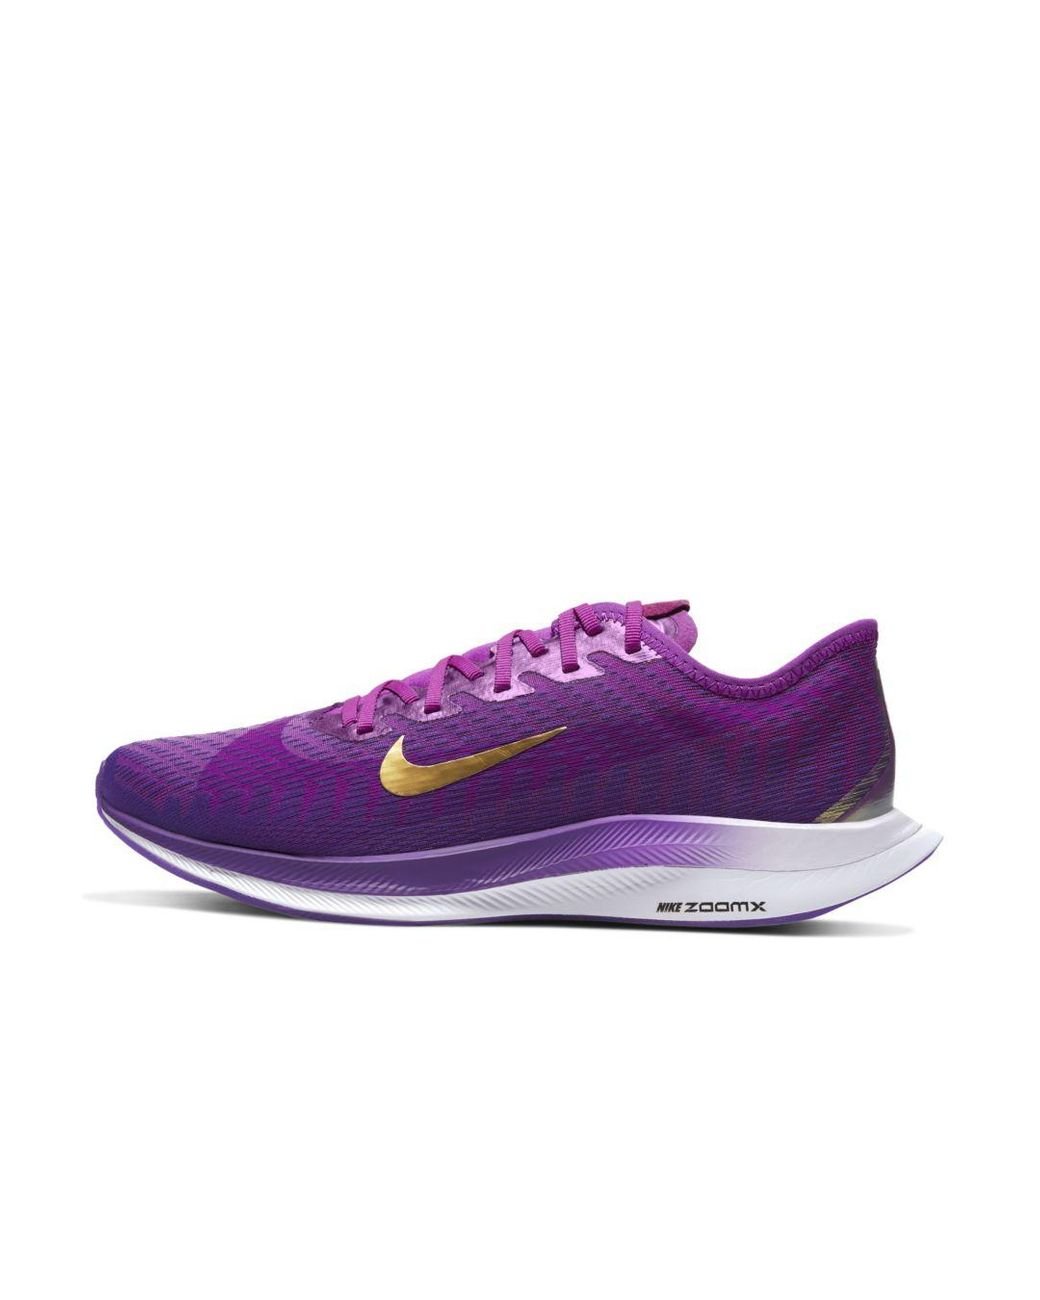 Nike Rubber Zoom Pegasus Turbo 2 Special Edition Running Shoes in Vivid ...